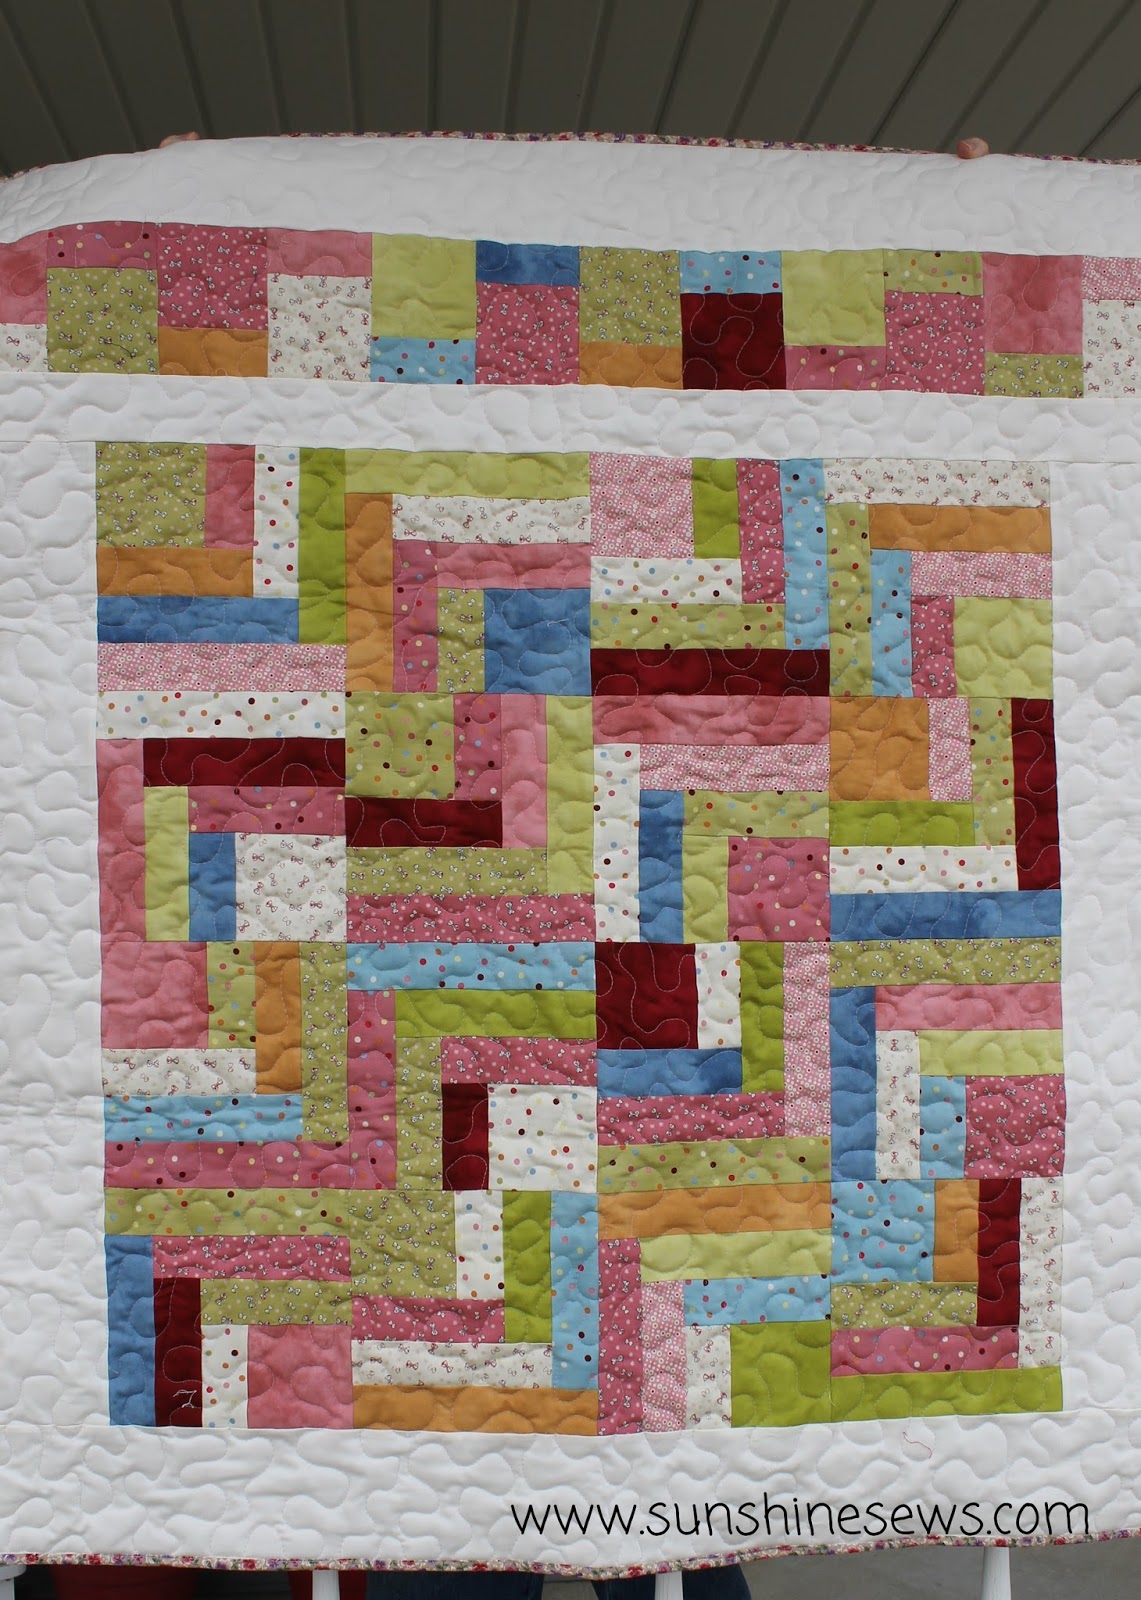 SunShine Sews...: Quilts for Kids - Sample Fabric Quilt